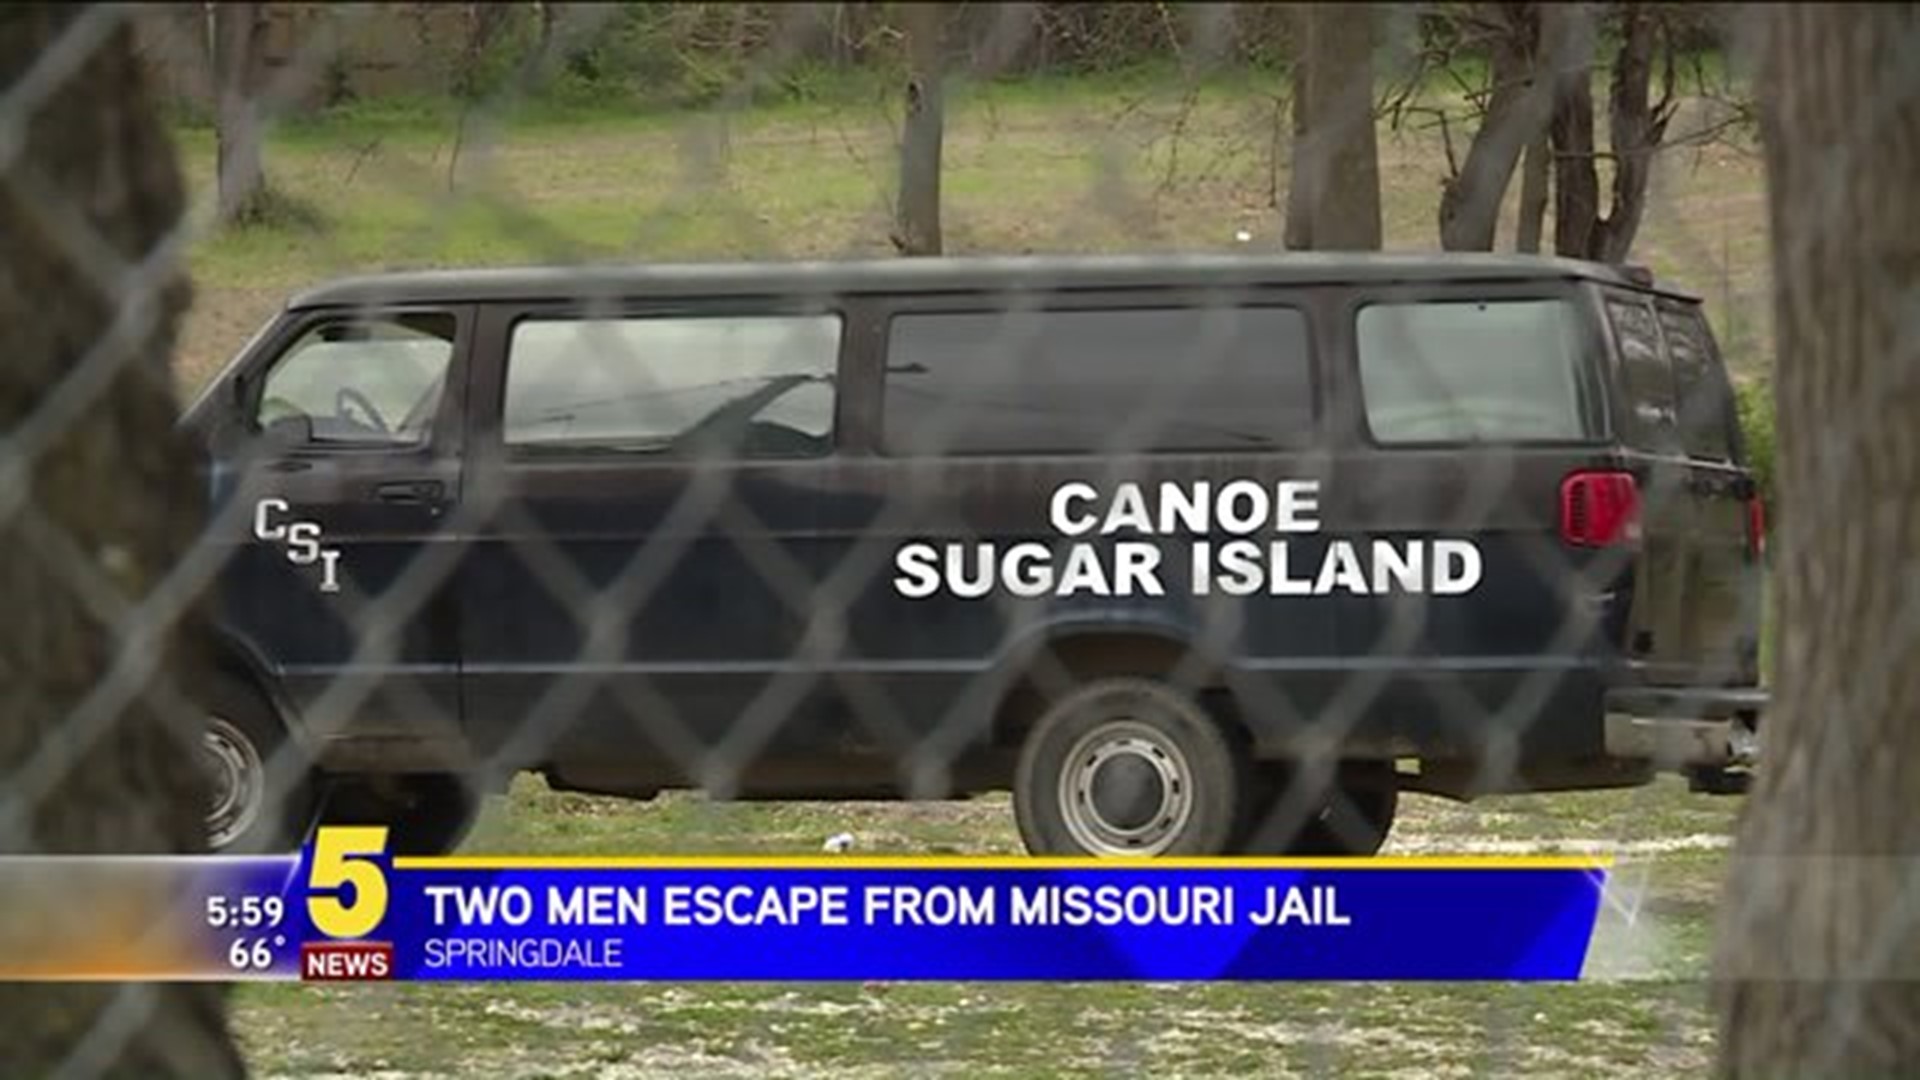 TWO MEN ESCAPE FROM MISSOURI JAIL